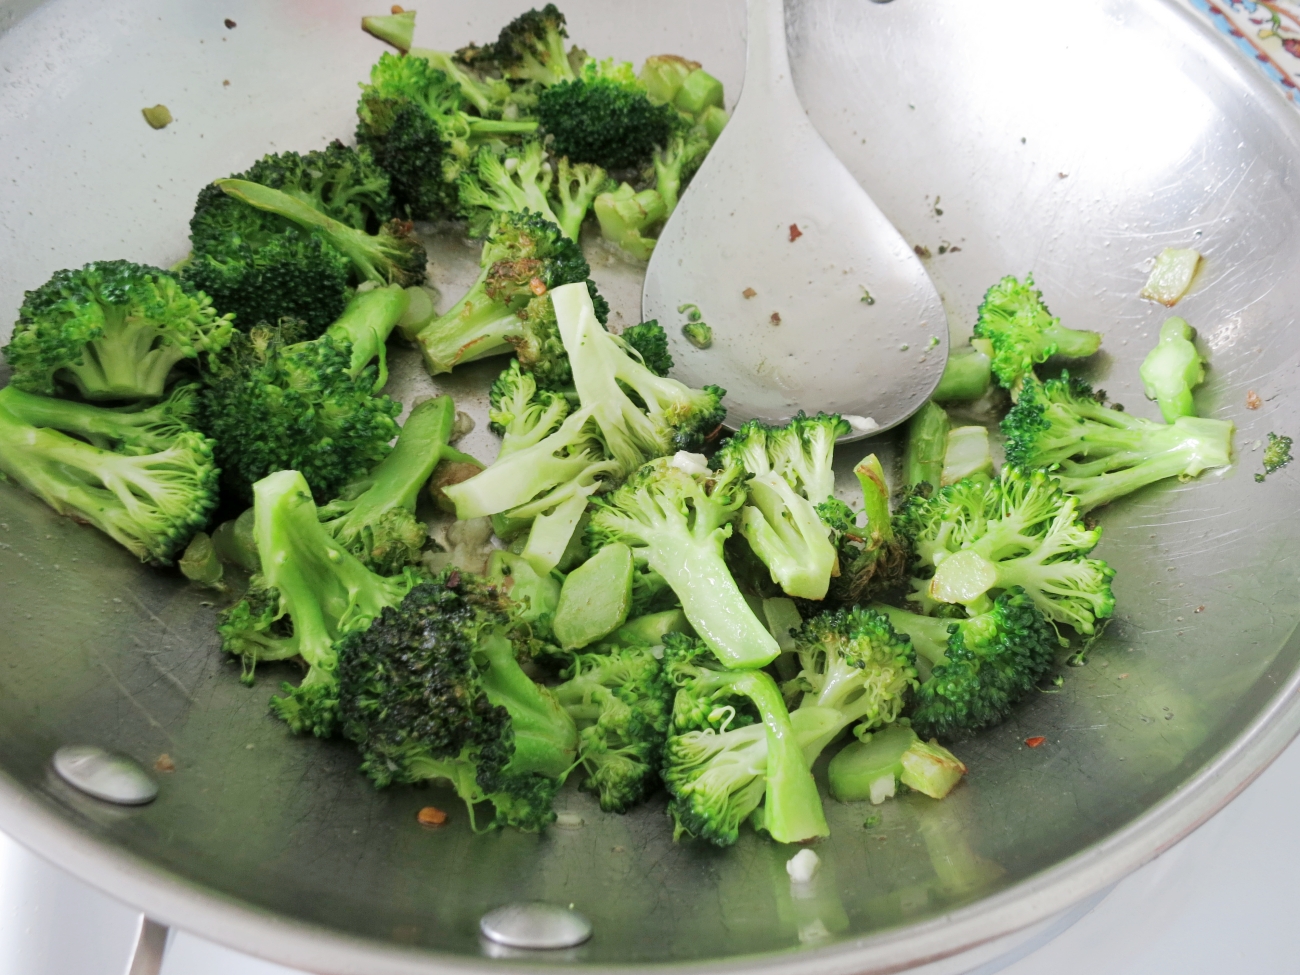 Add broccoli to pan and cook for 2 minutes without stirring. Stir once and cook for 2-3 more minutes. Turn heat off. Add garlic and allow to cook for 1 minute.